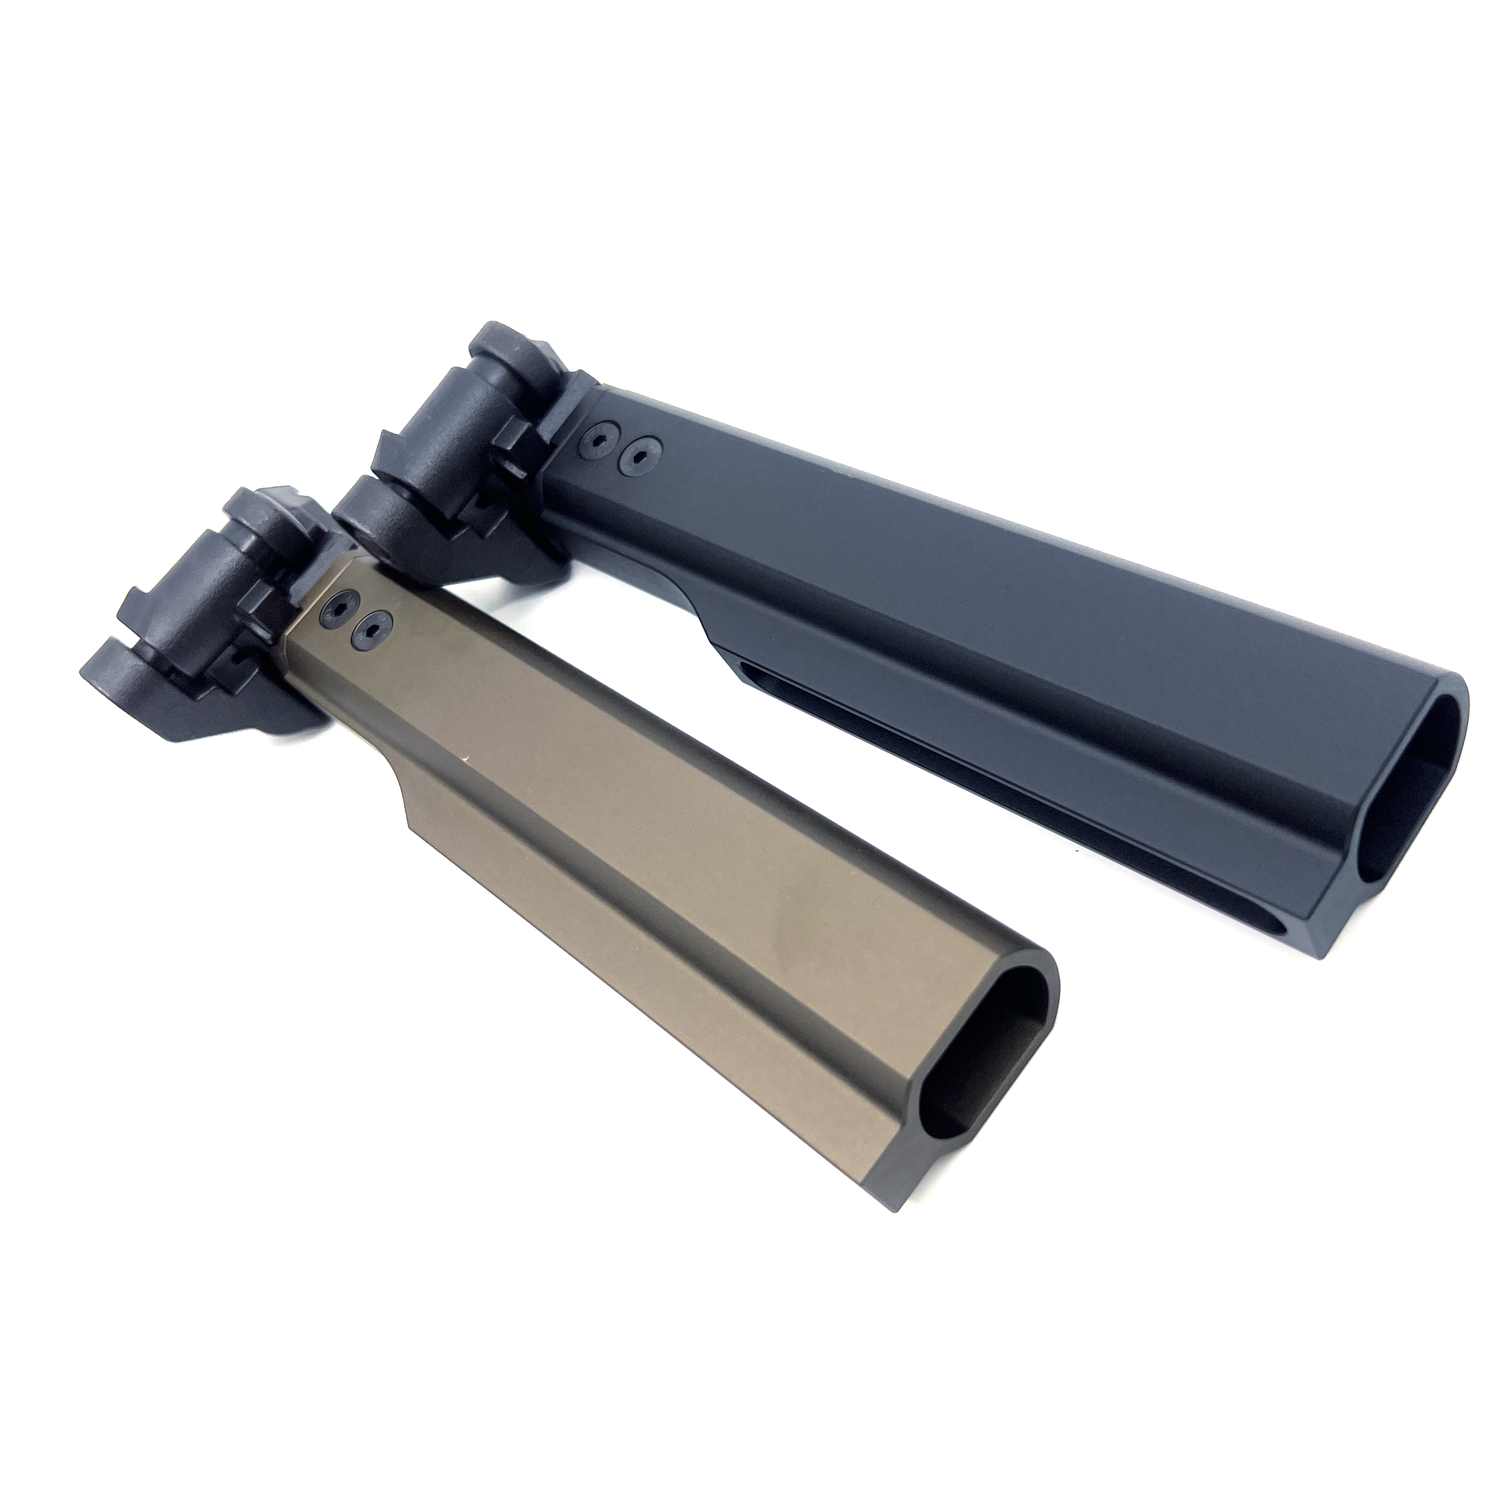 AIRSOFT ARTISAN NEW TYPE M4 FOLDING STOCK ADAPTER FOR M1913 (Black / Tan)